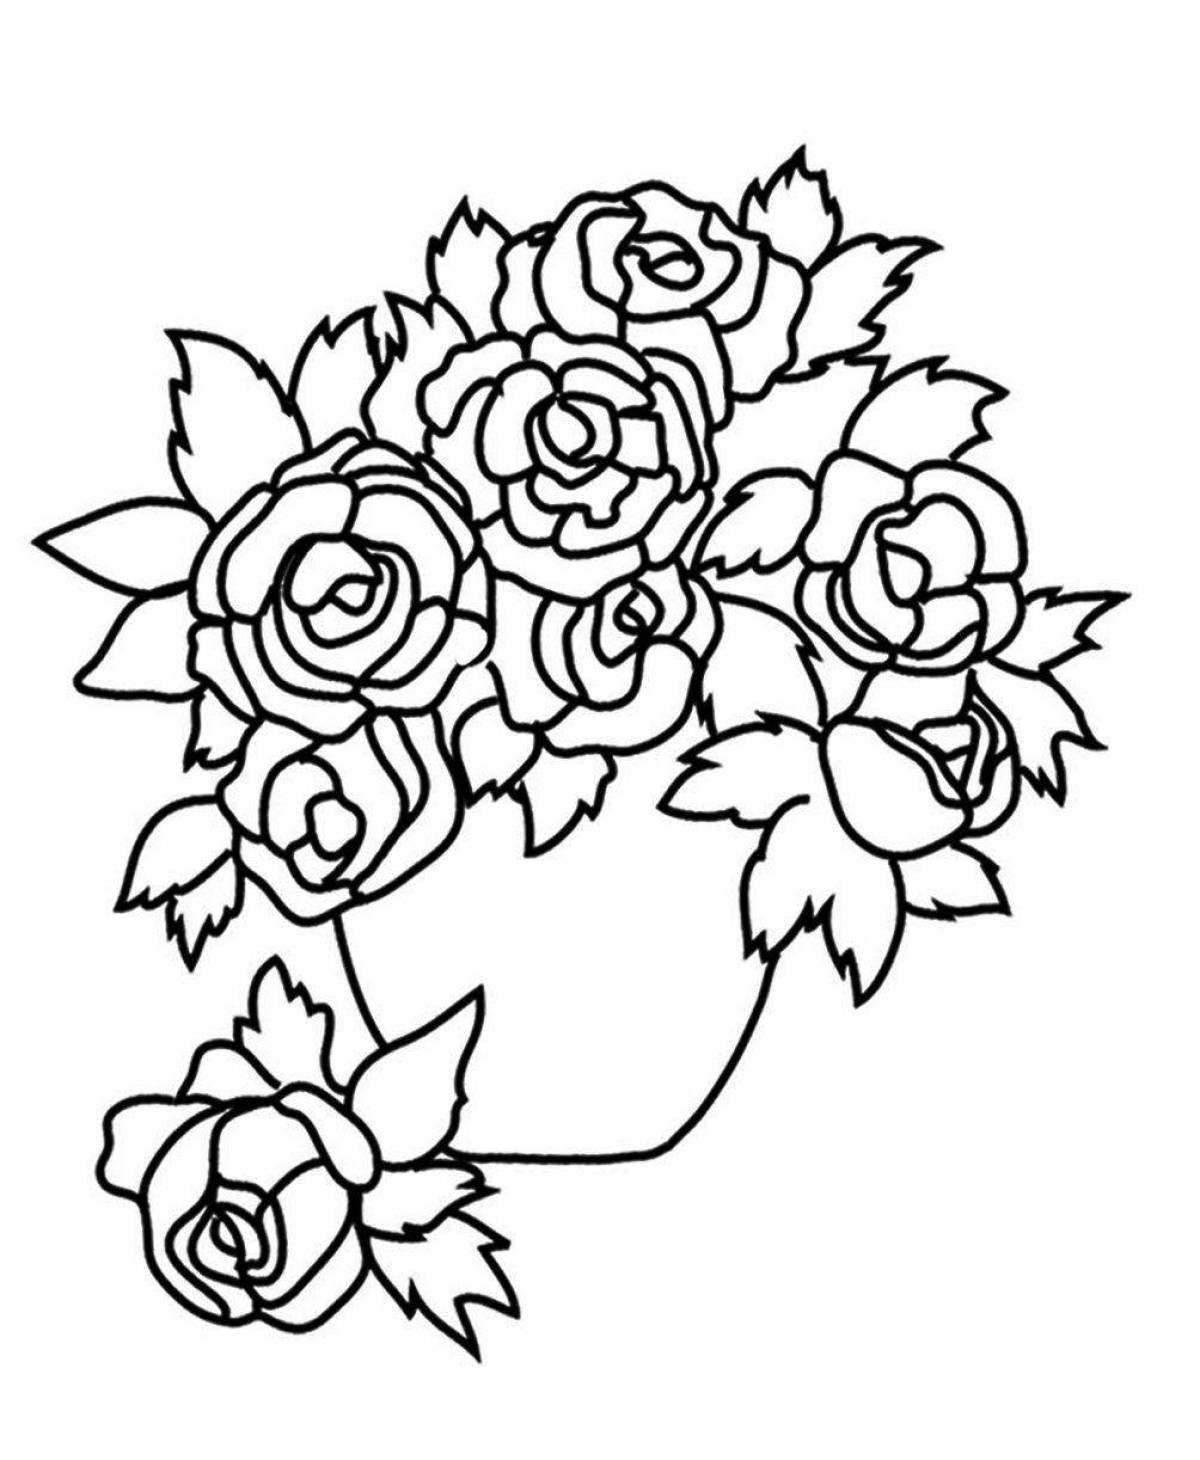 Colouring stunning bouquet of roses